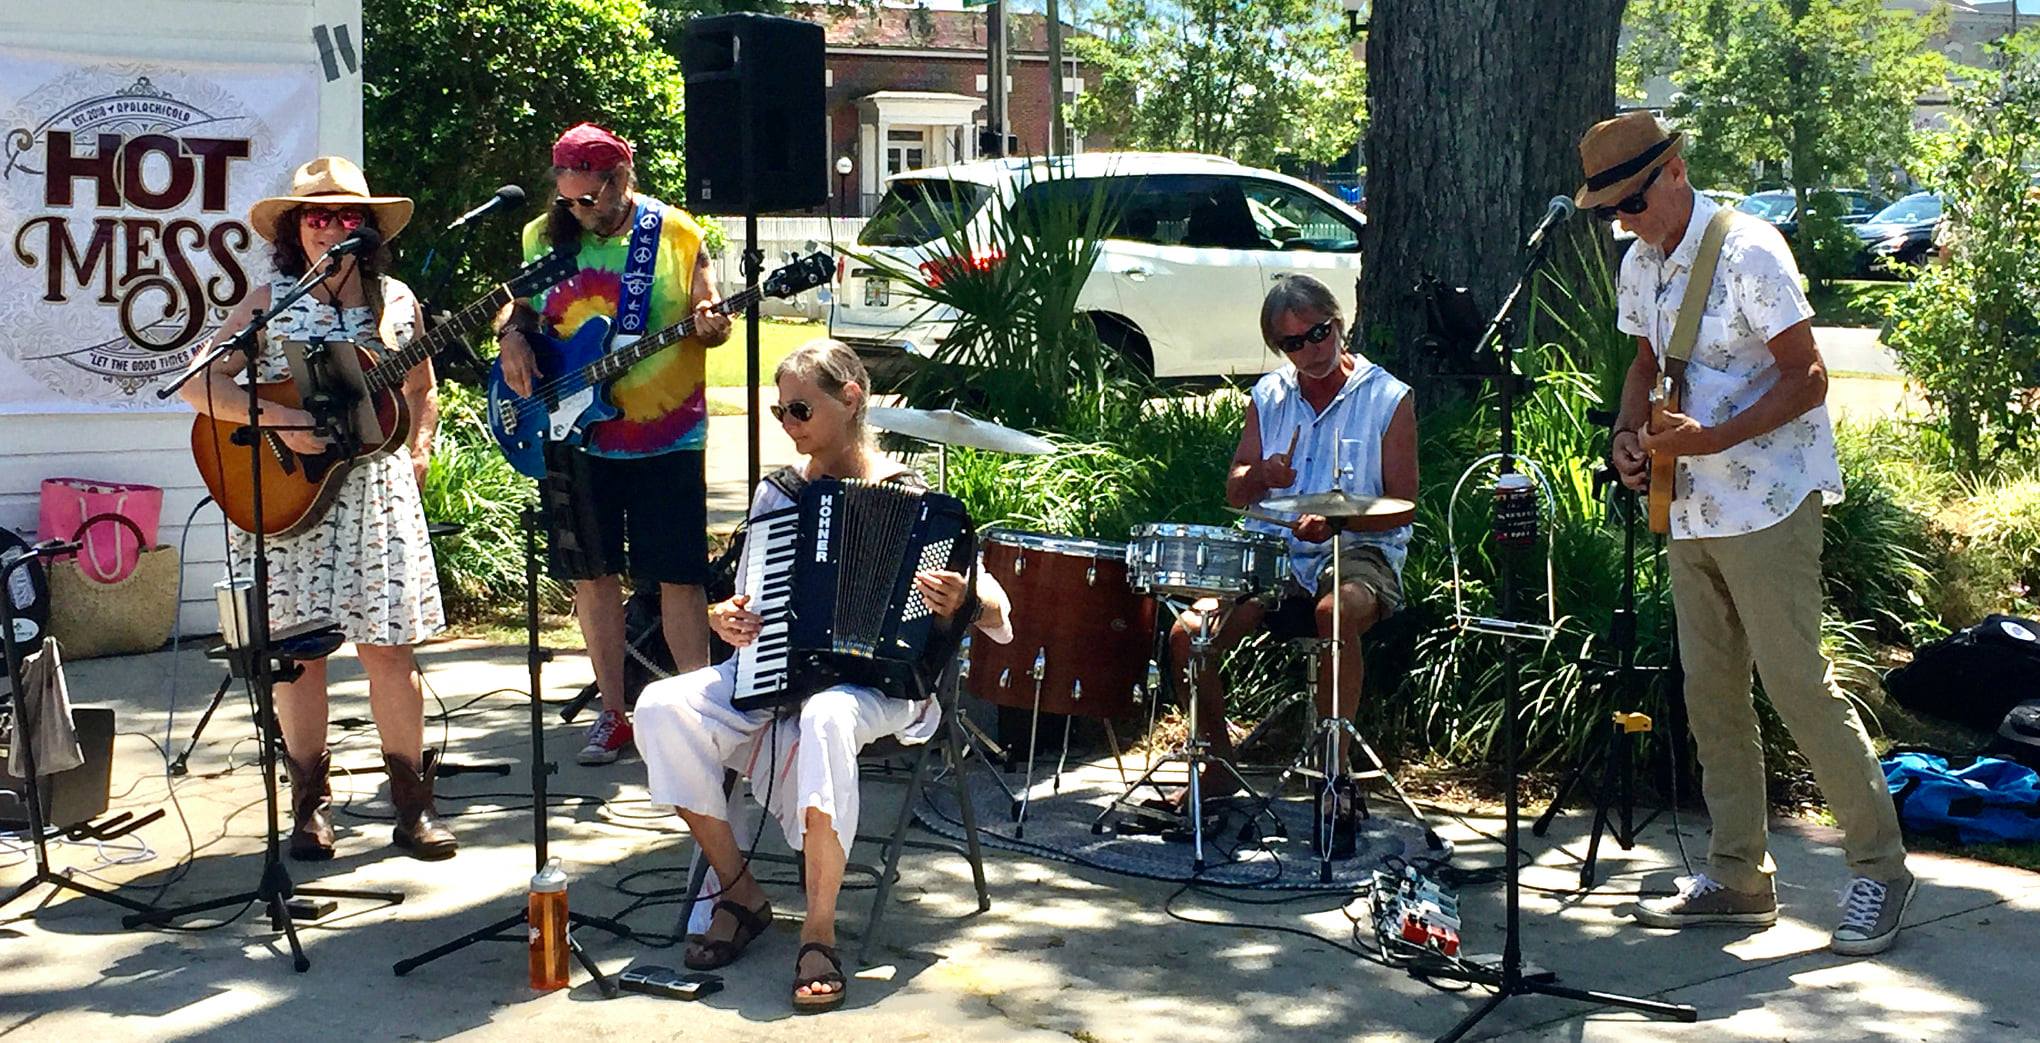 Hot Mess playing music in Apalachicola